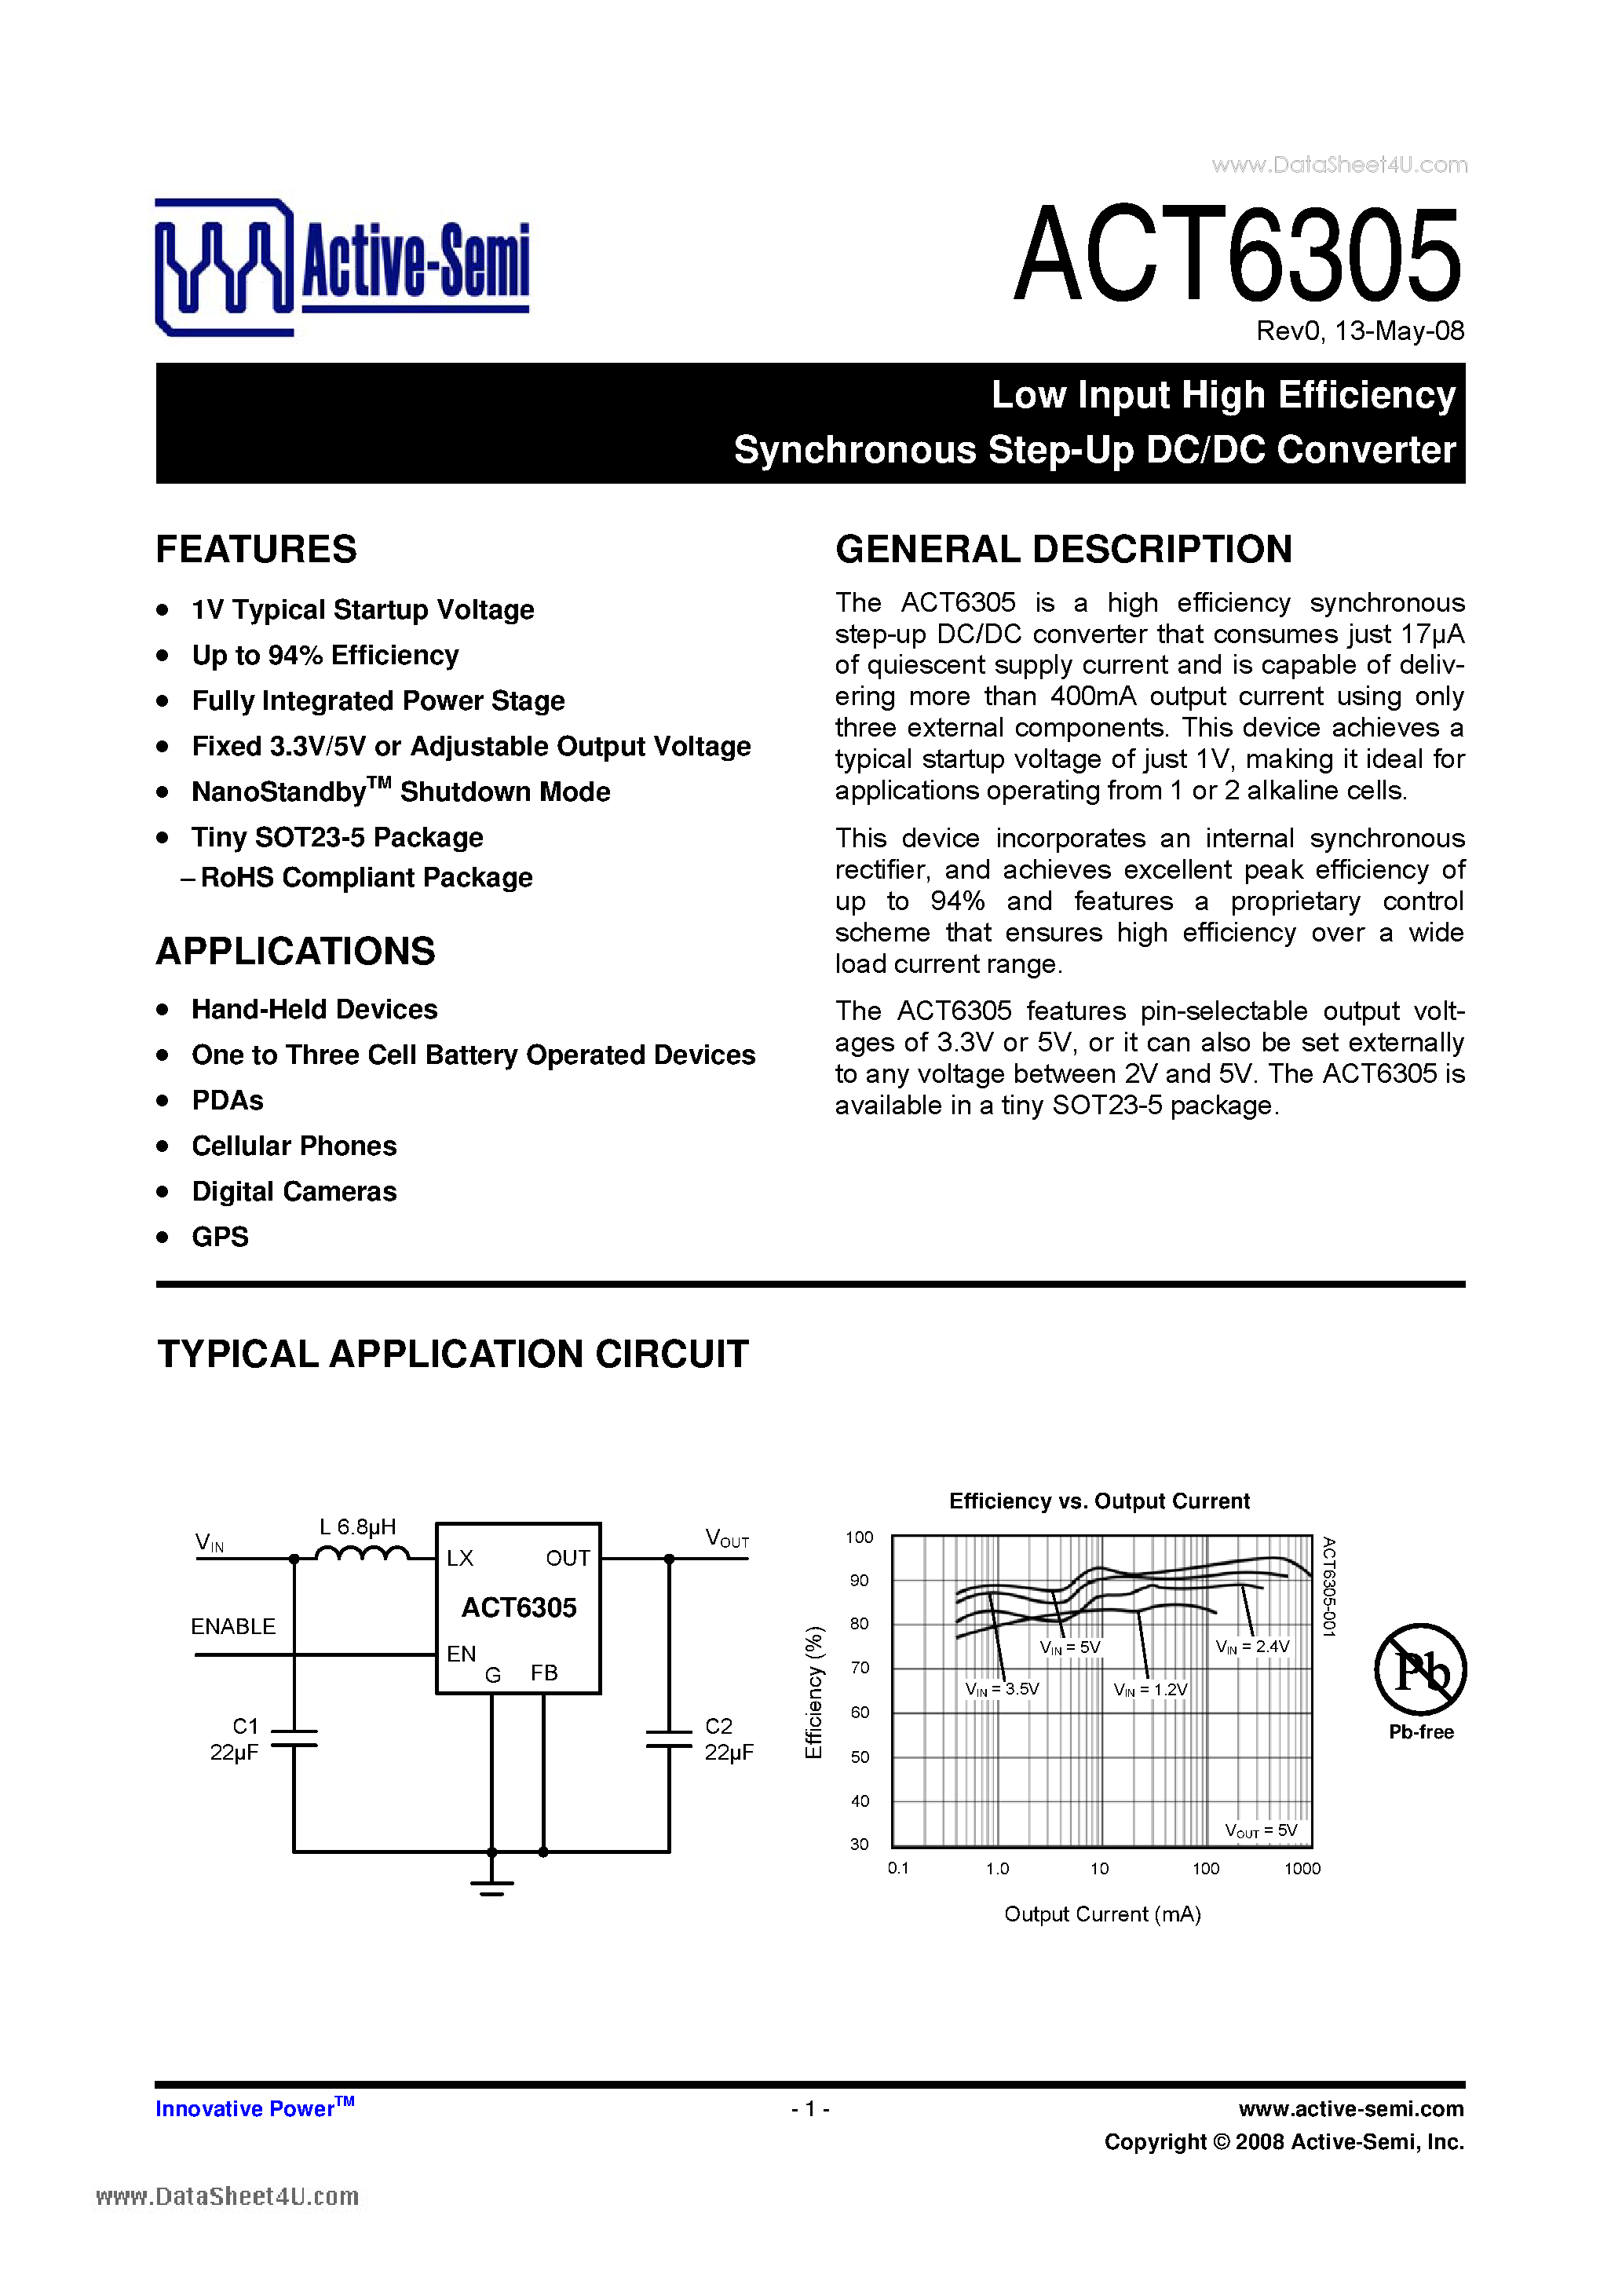 Datasheet ACT6305 - Low Input High Efficiency Synchronous Step-Up DC/DC Converter page 1